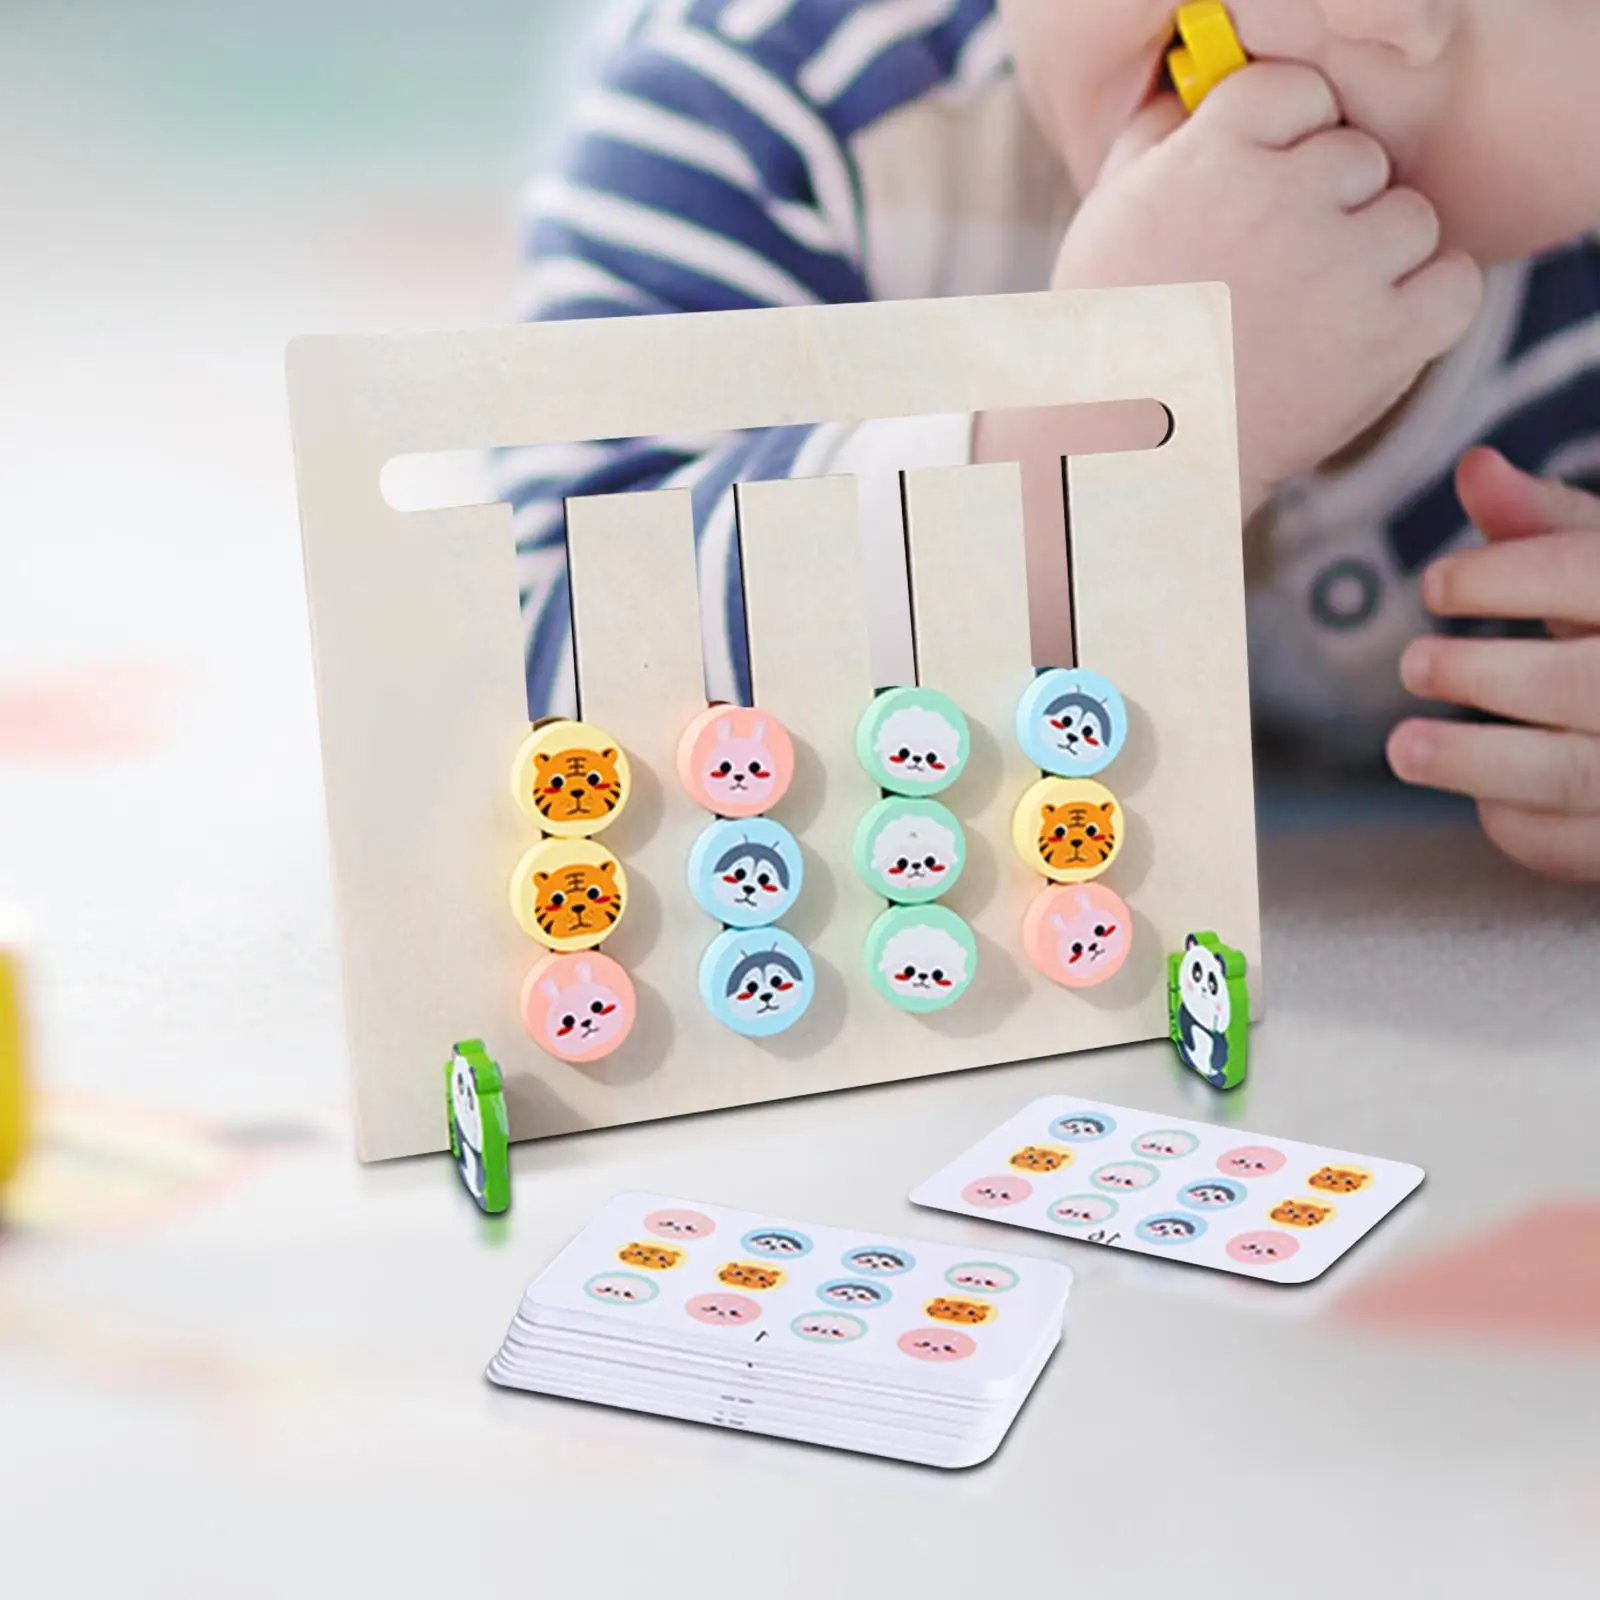 Kids Develop Brain Puzzle Wooden Animal Matching Game Preschool Learning Toy for 2 to 6 Age, Birthday Present Arithmetic Toy